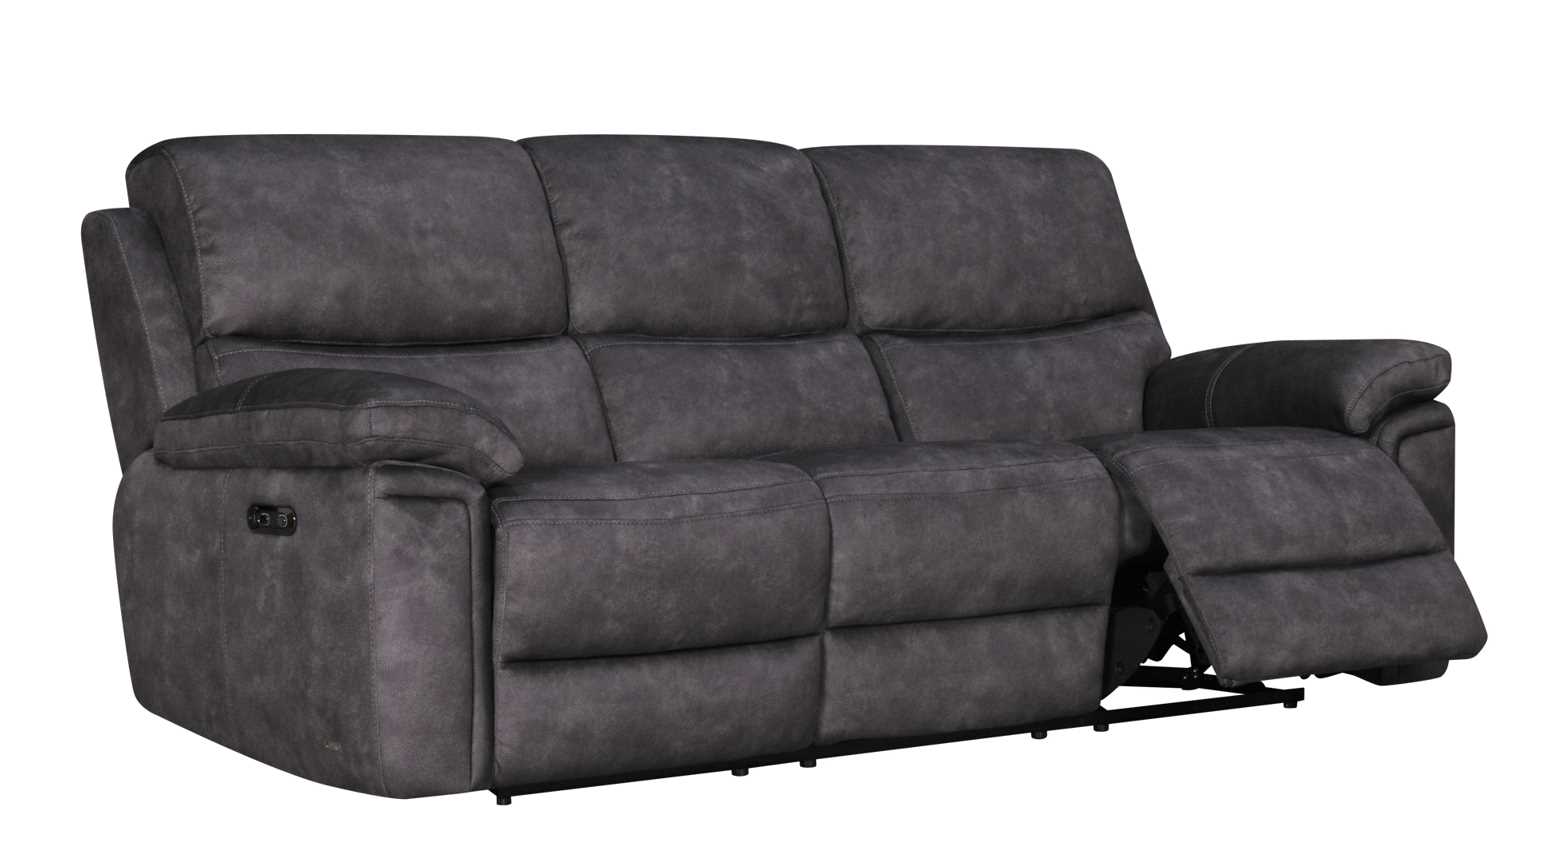 Relaxation Refined The Allure of Reclining Features in Chesterfield Sofas  %Post Title